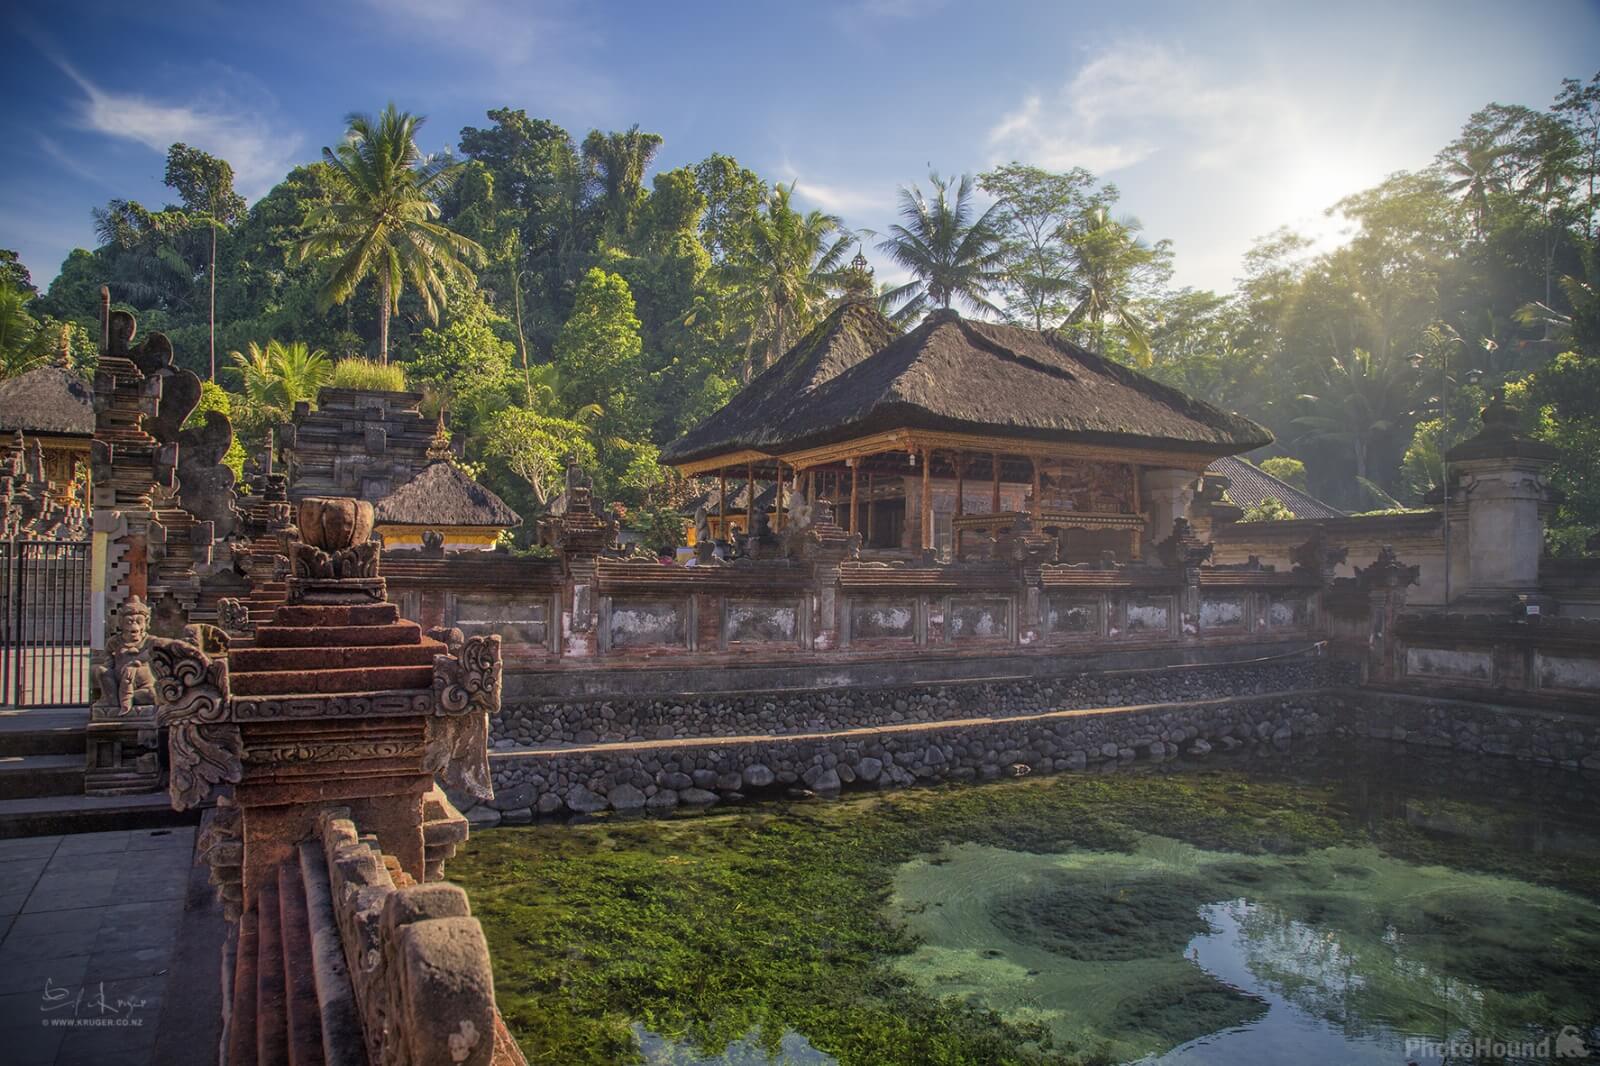 Image of Tirta Empul Temple by Ed Kruger